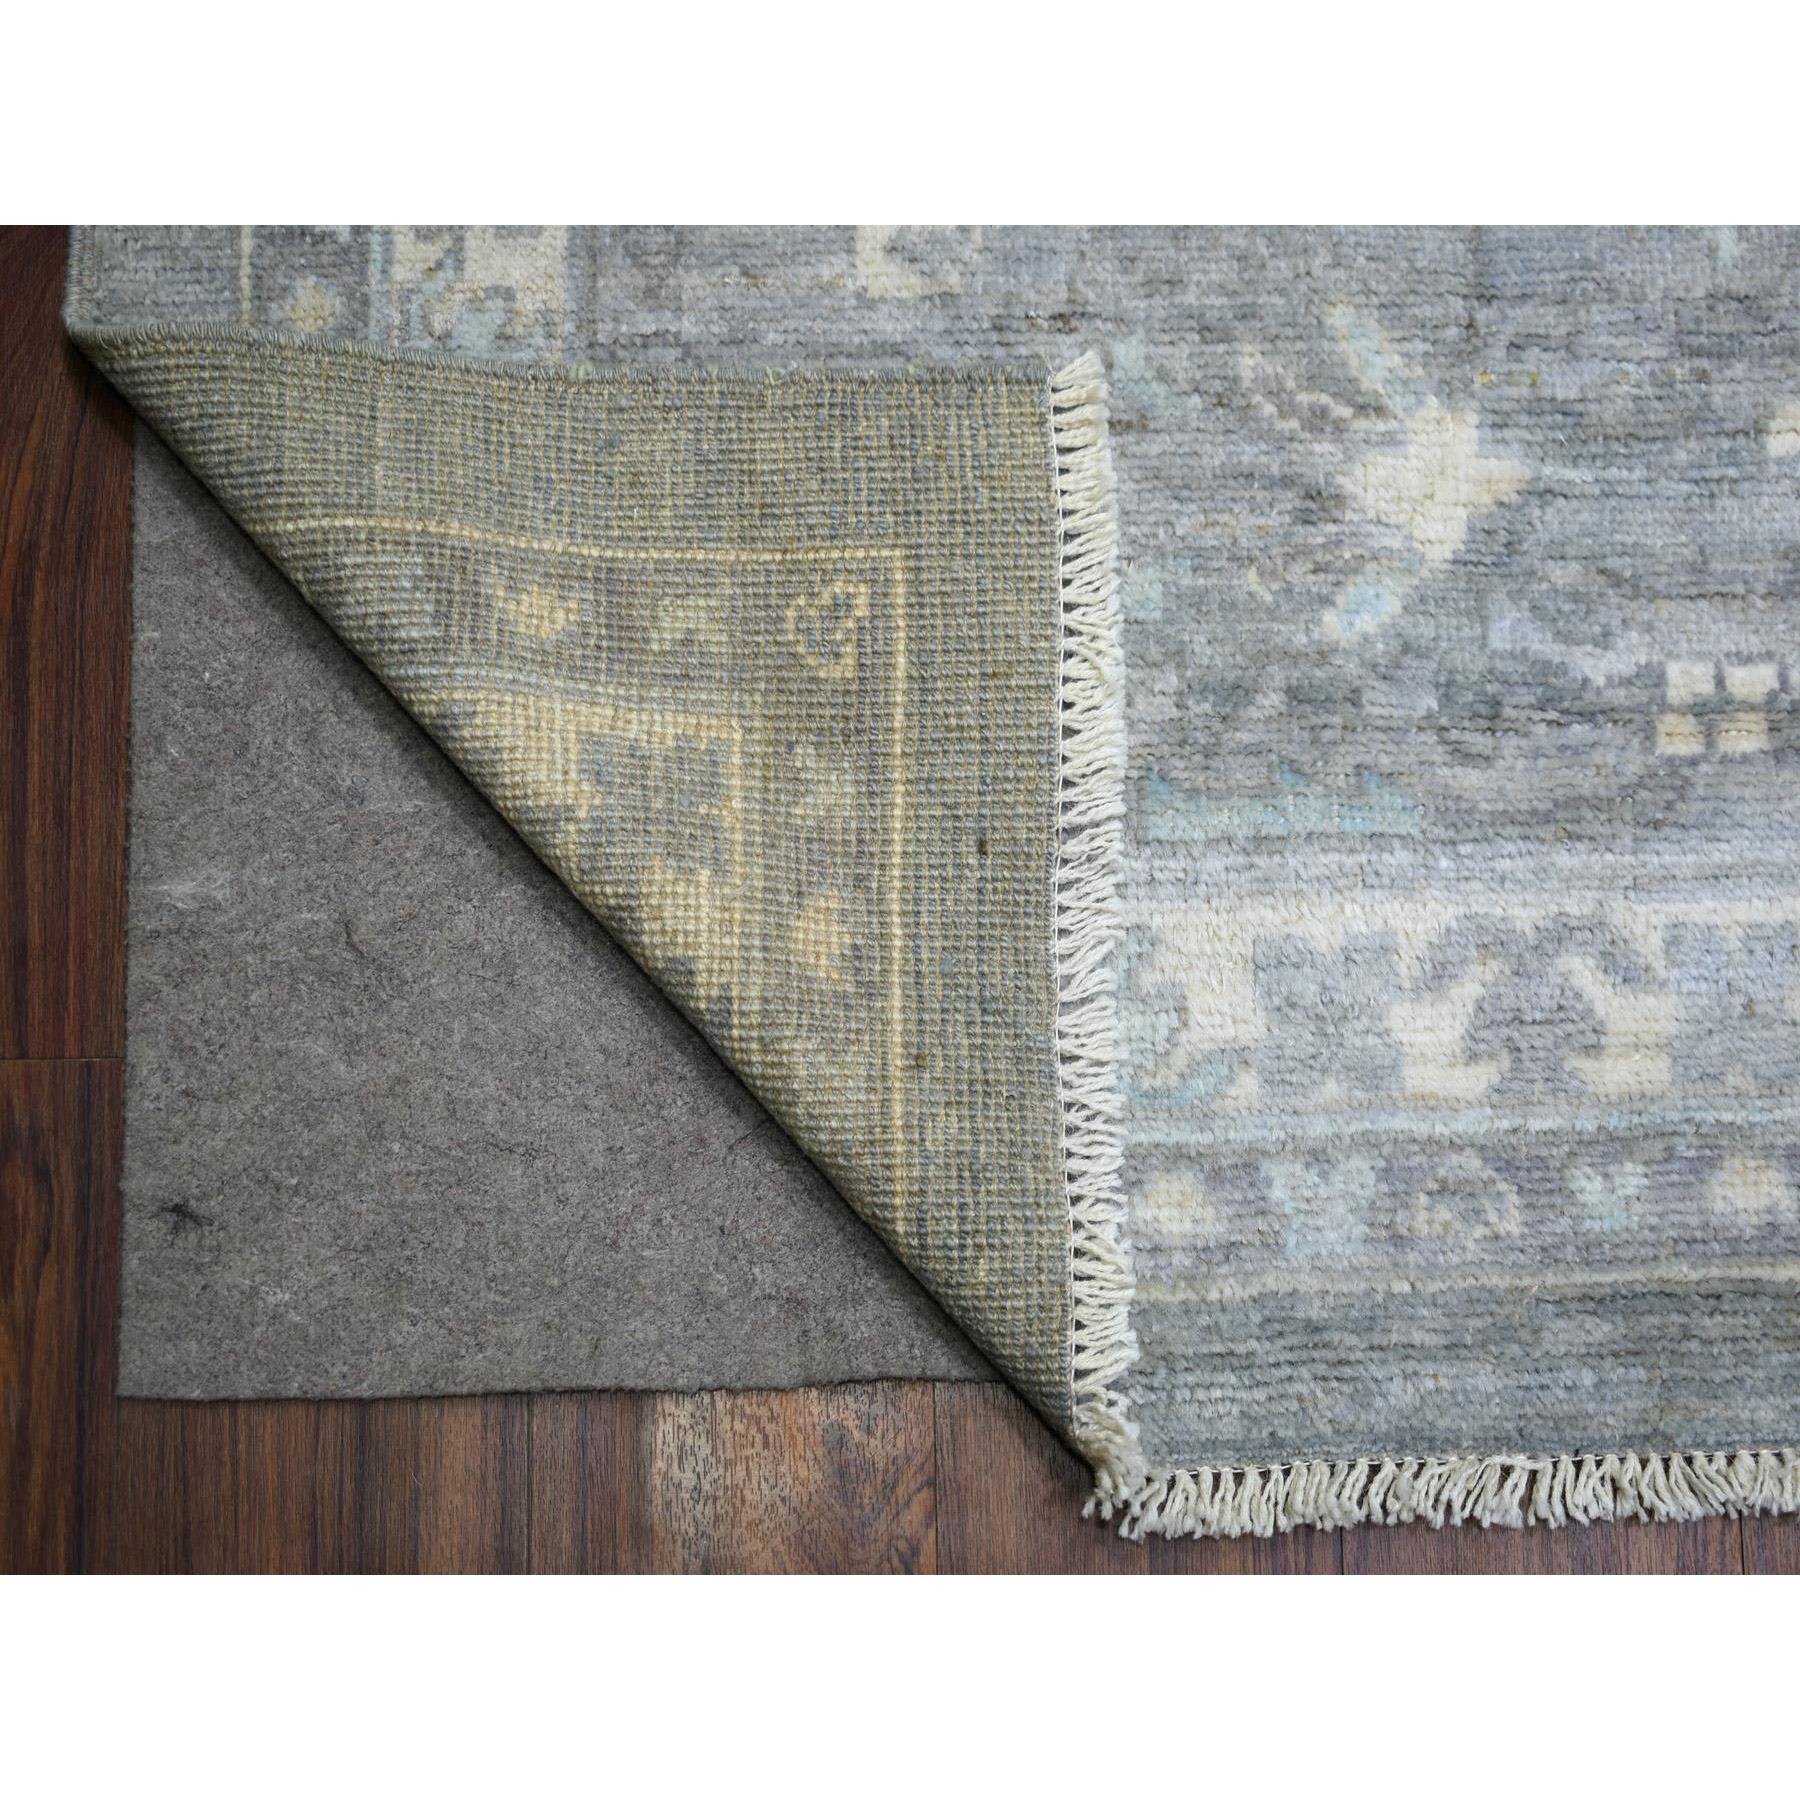 12'x15'2" Charcoal Gray, Hand Woven Afghan Angora Oushak, Natural Dyes Soft and Supple Wool, Oversized Oriental Rug 